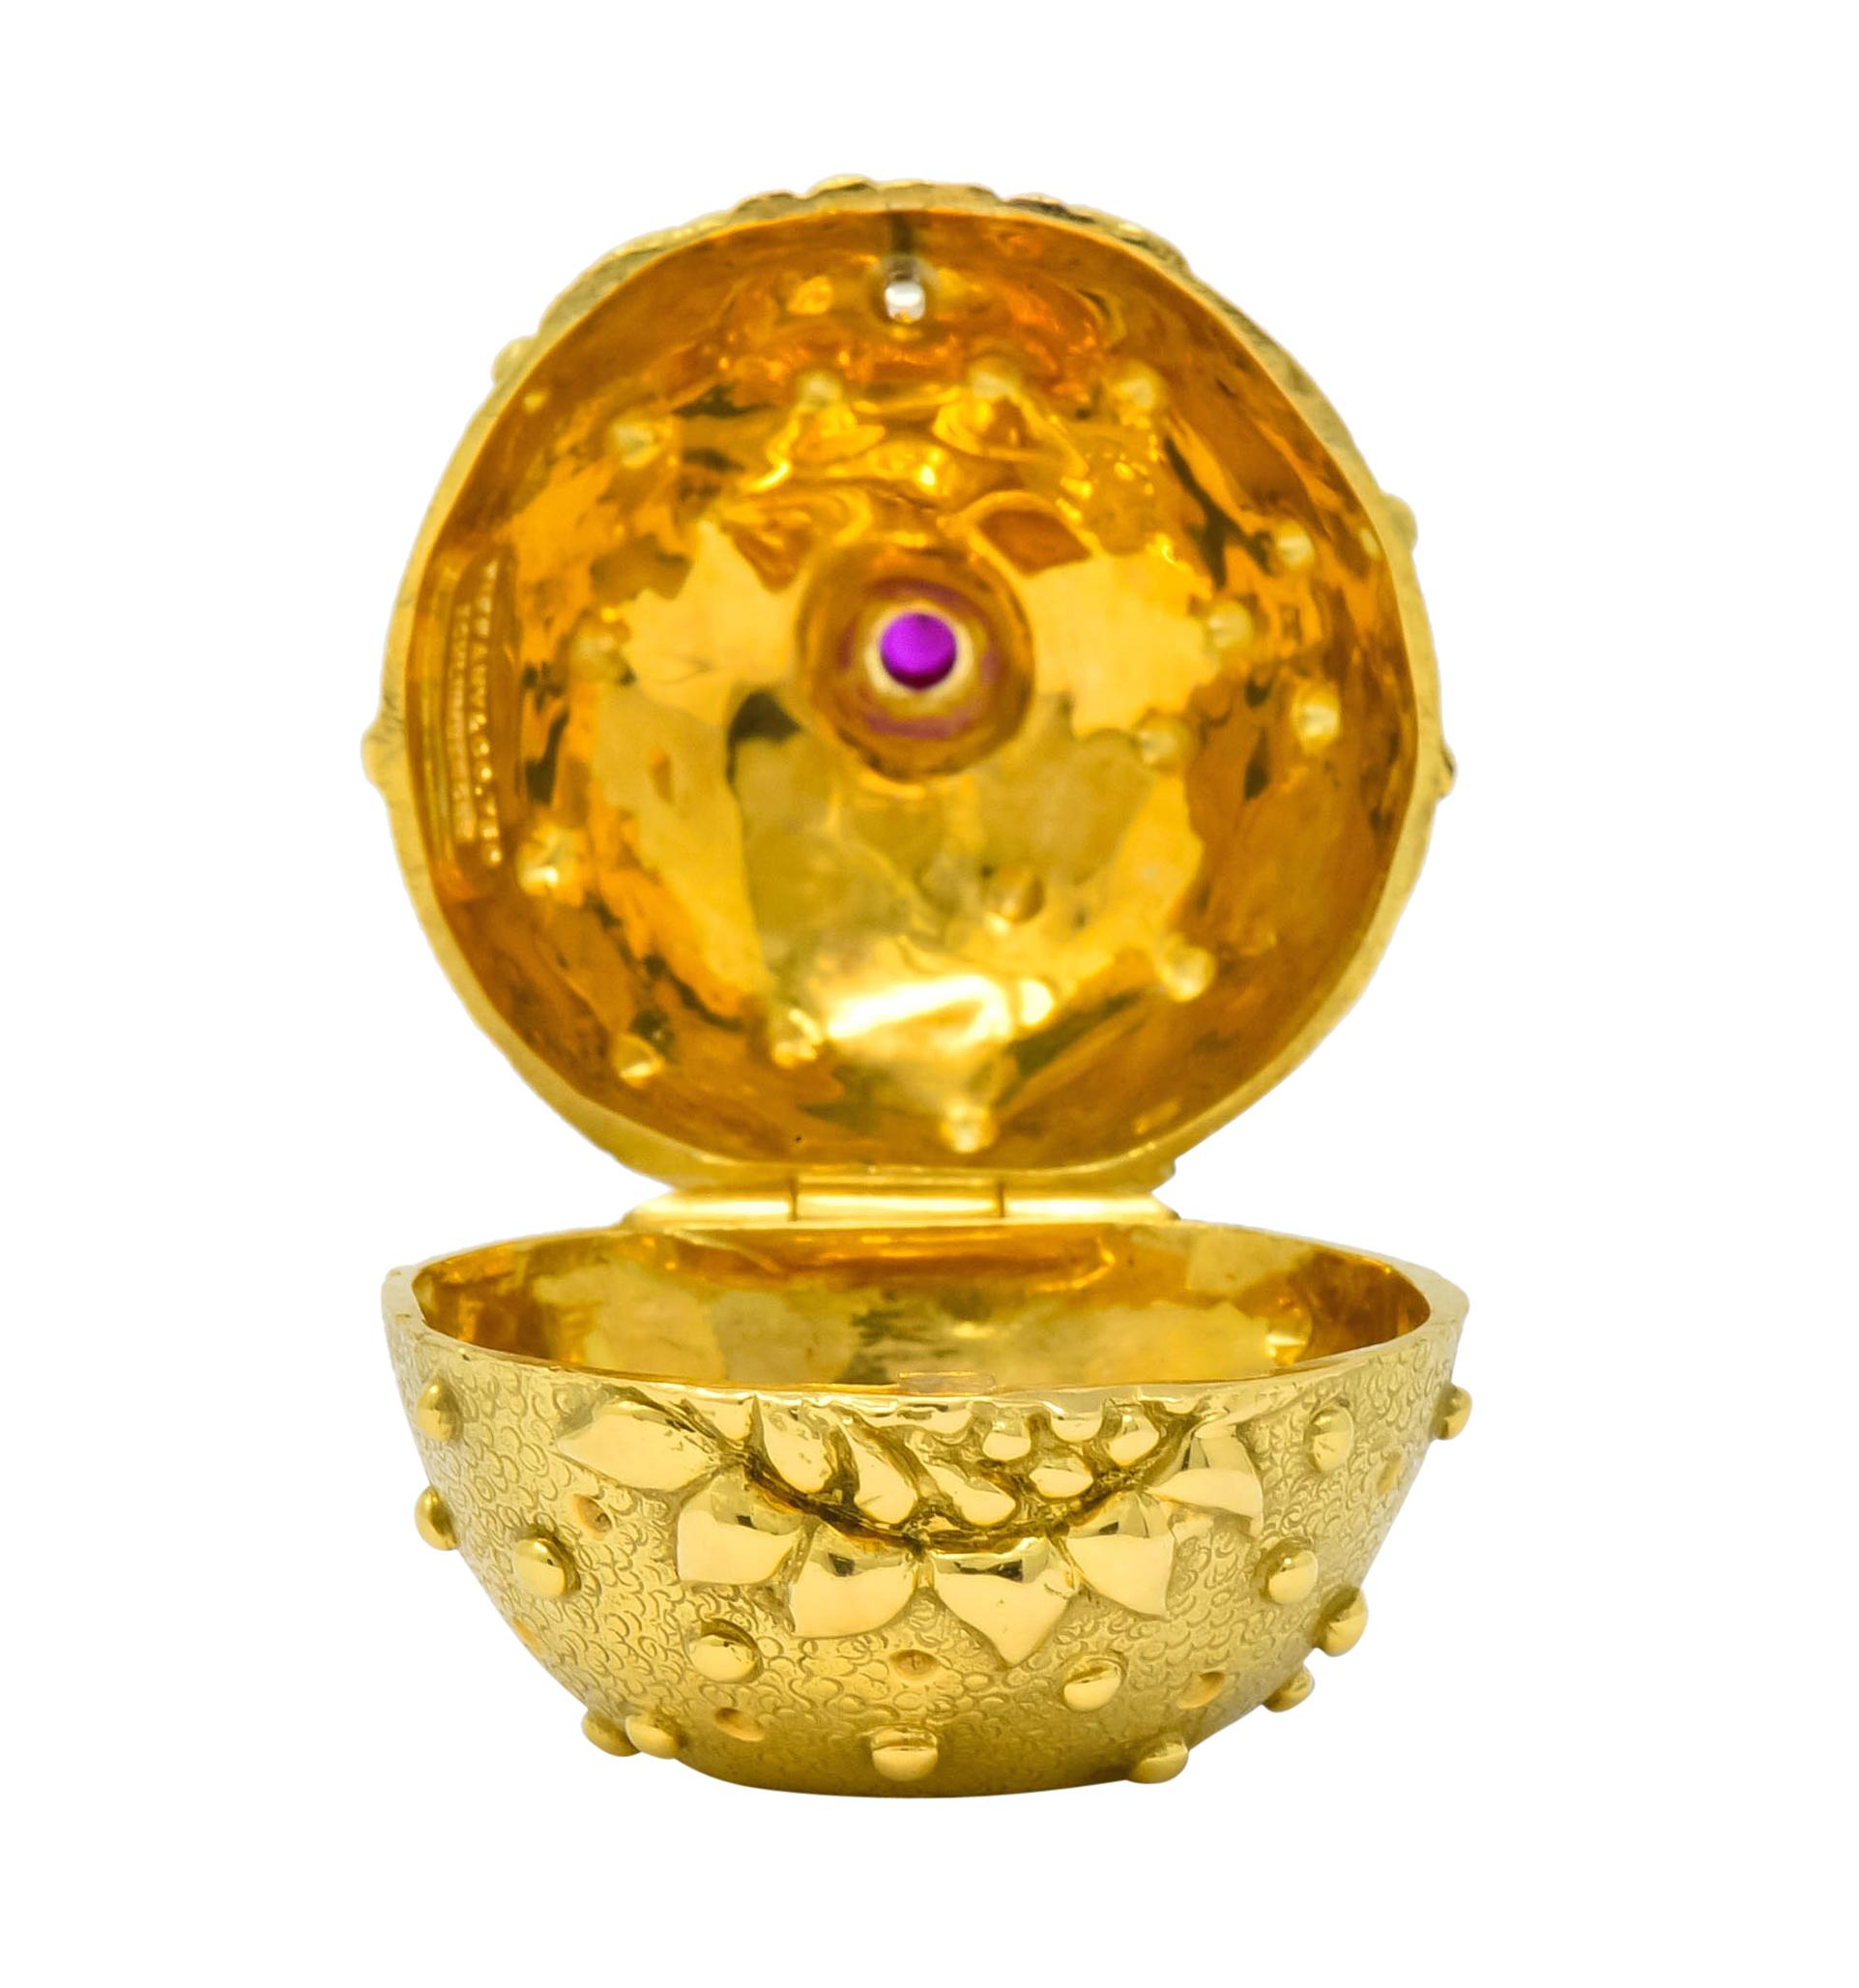 Designed as pomegranate shaped repousse pill box, stippled matte gold decorated throughout by gold bead detail

Featuring front facing foliate motif and topped by foliate stem erupting into a bezel set rose cut ruby weighing approximately 0.20